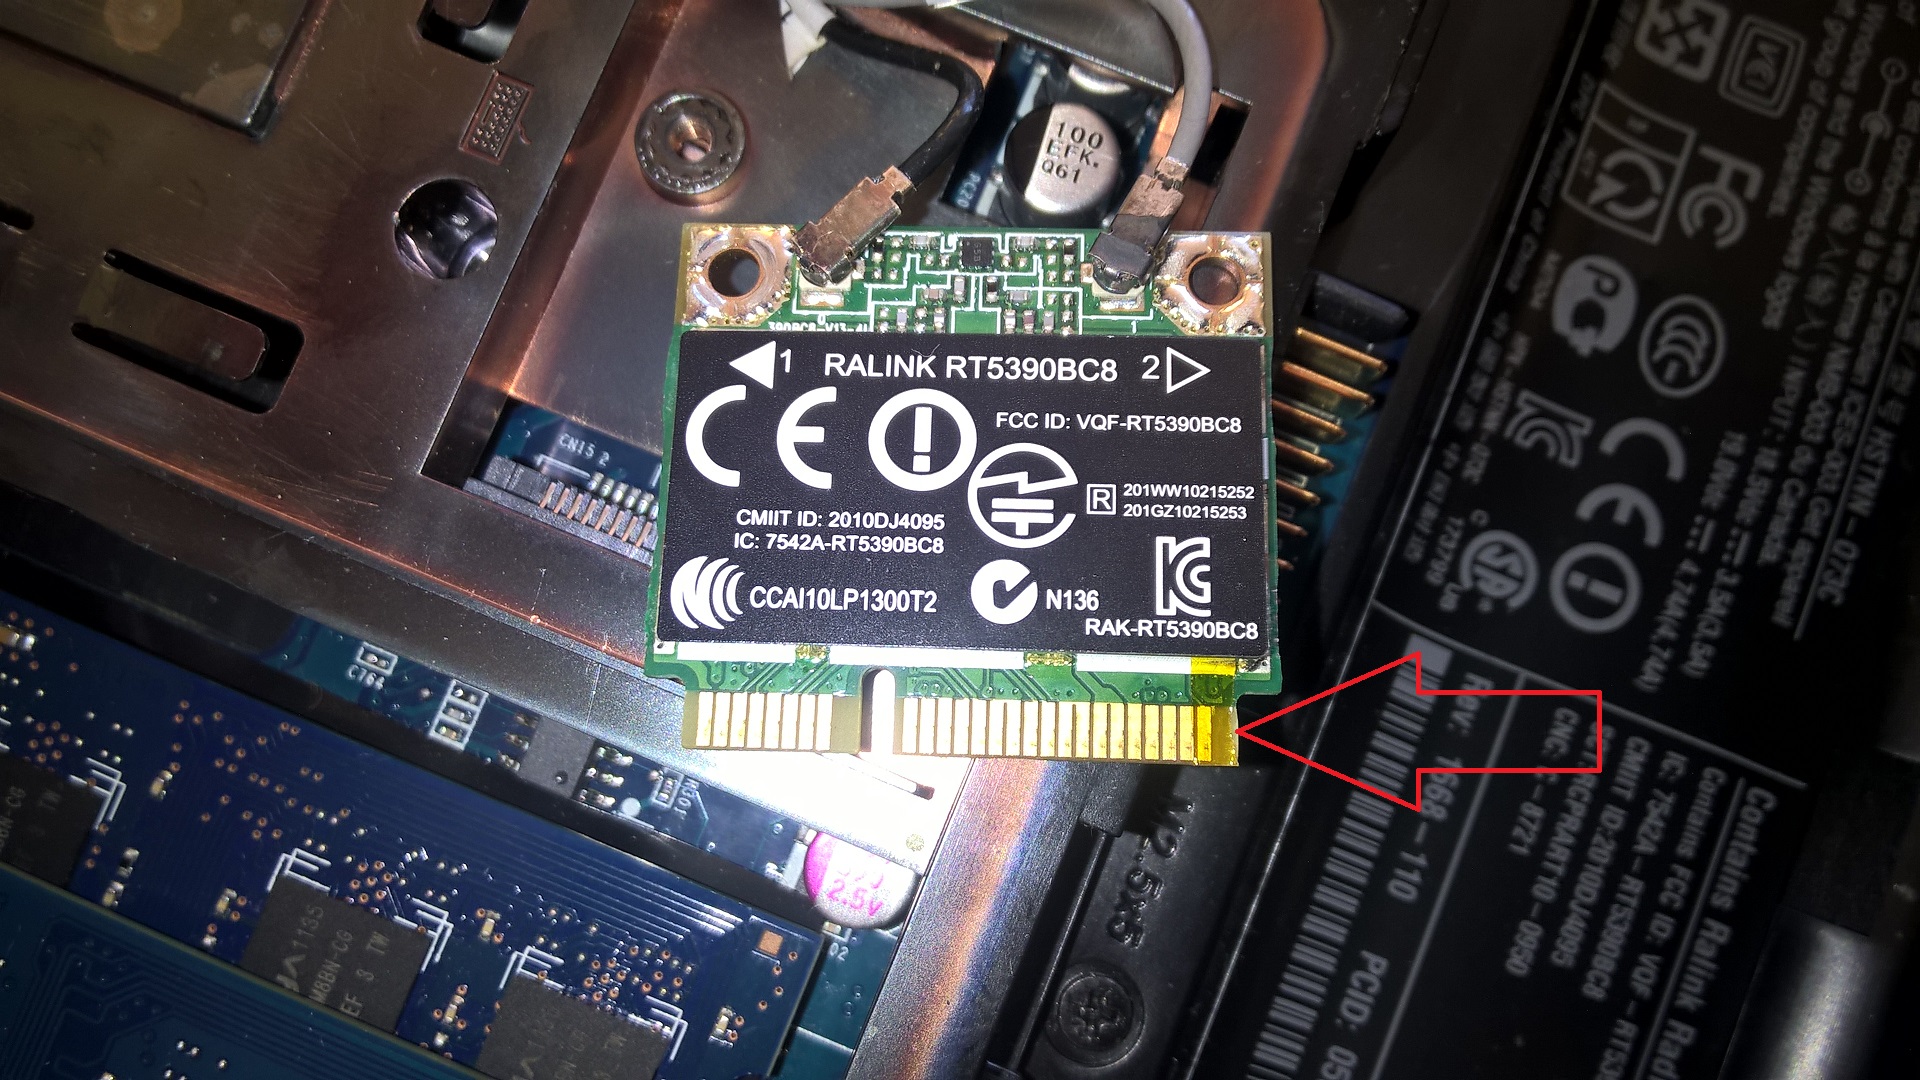 i need a bluetooth driver on hp pavilion g6 os windows 8(64 ... - Page 2 -  HP Support Community - 2445195